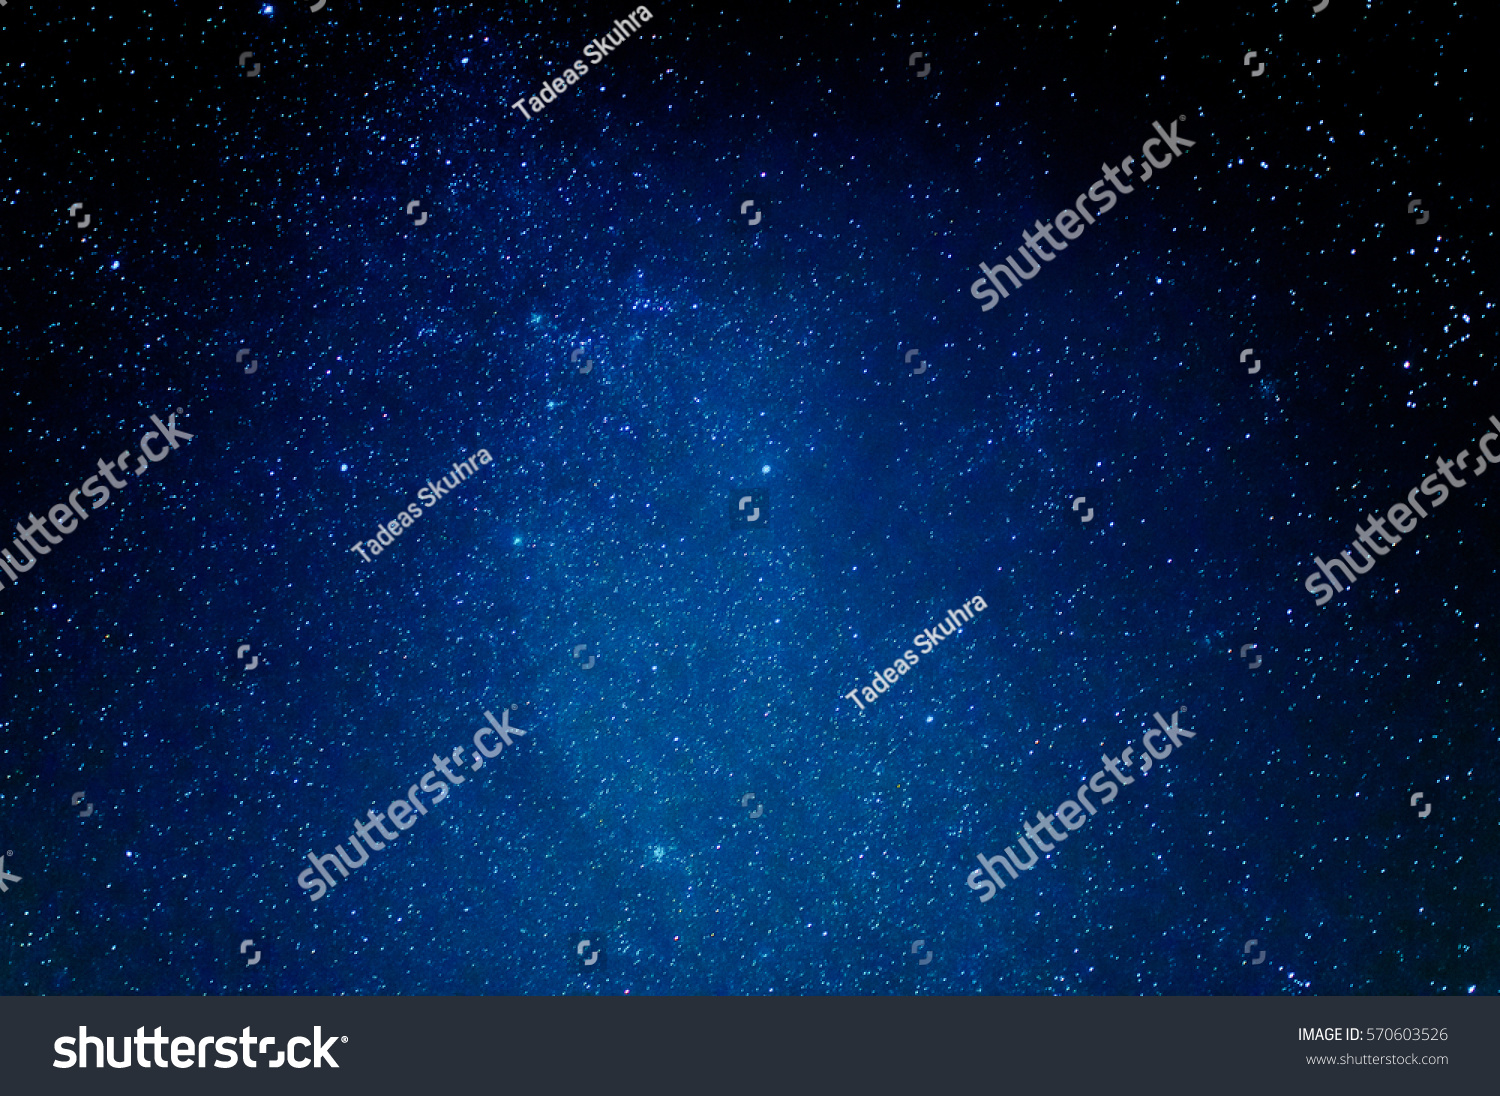 Beautiful scenery of blue night sky with stars. Star trails #570603526